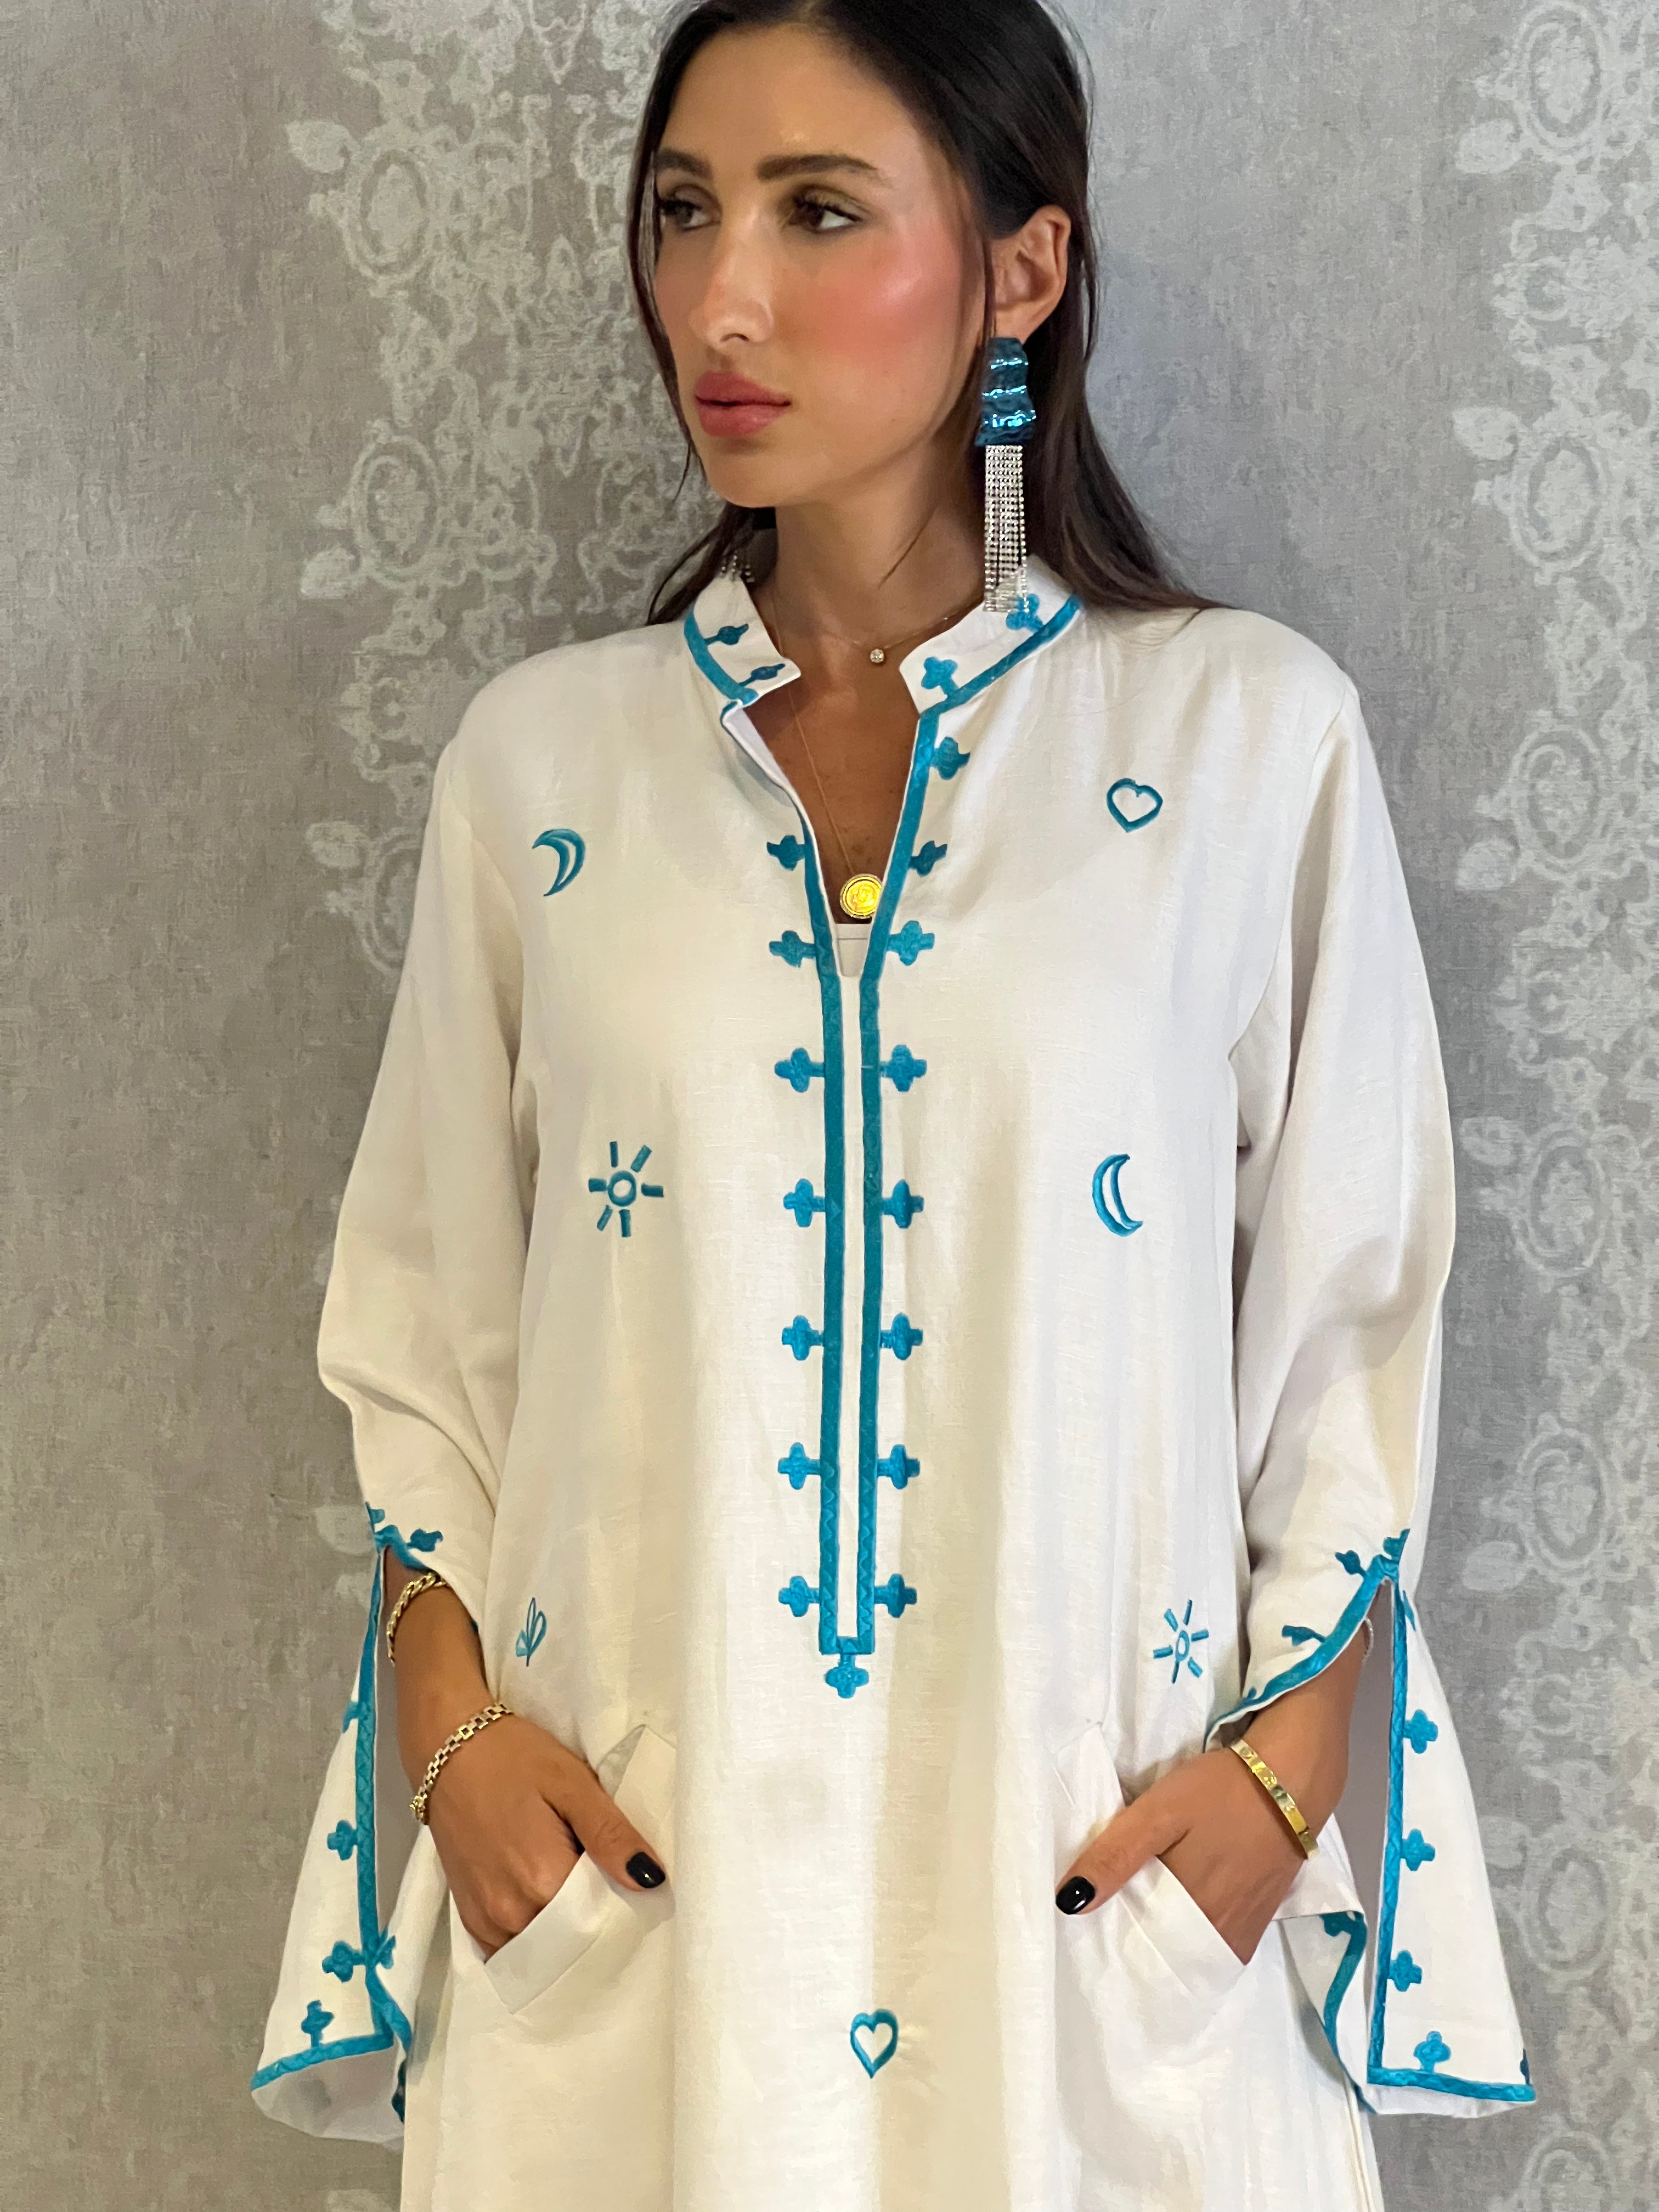 Mona from Morocco: Traditional White Abaya with Blue Embroidery